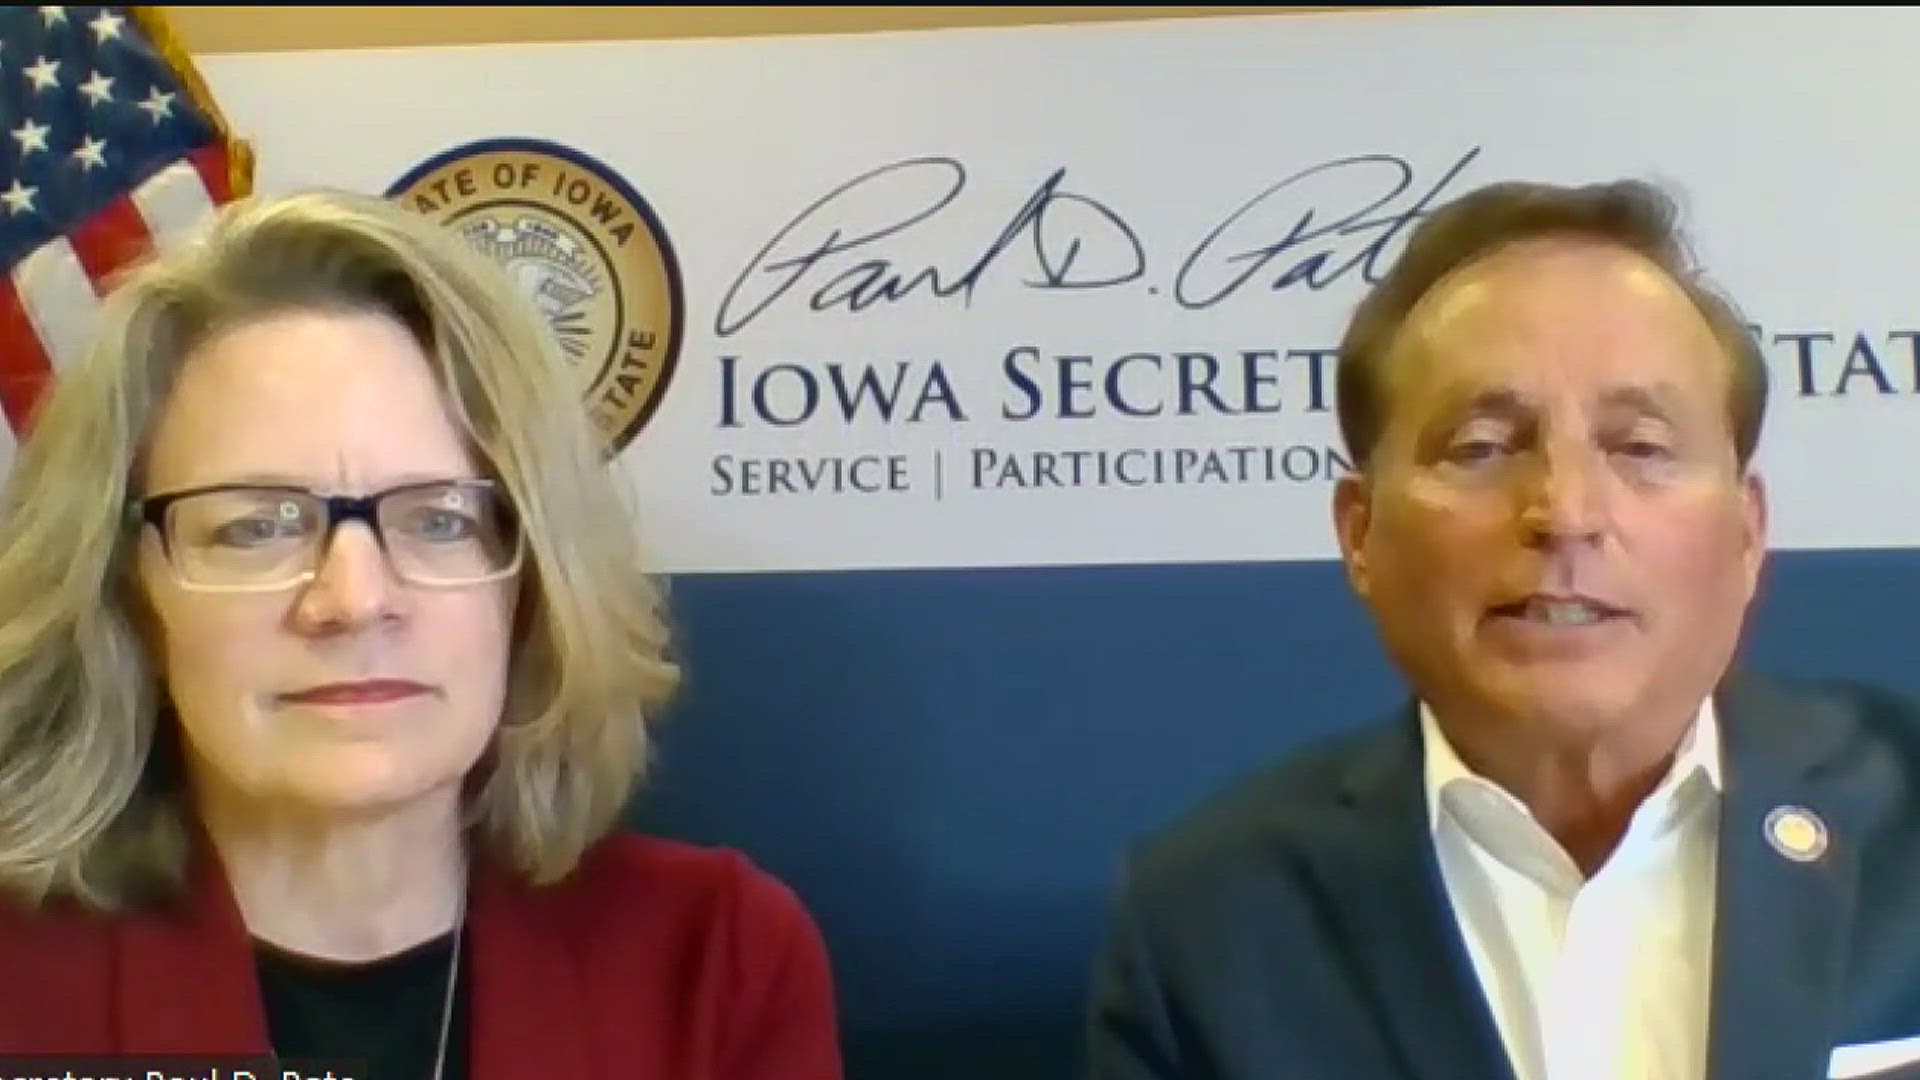 Paul Pate said more than 30,000 new businesses have been founded in Iowa in the last year.